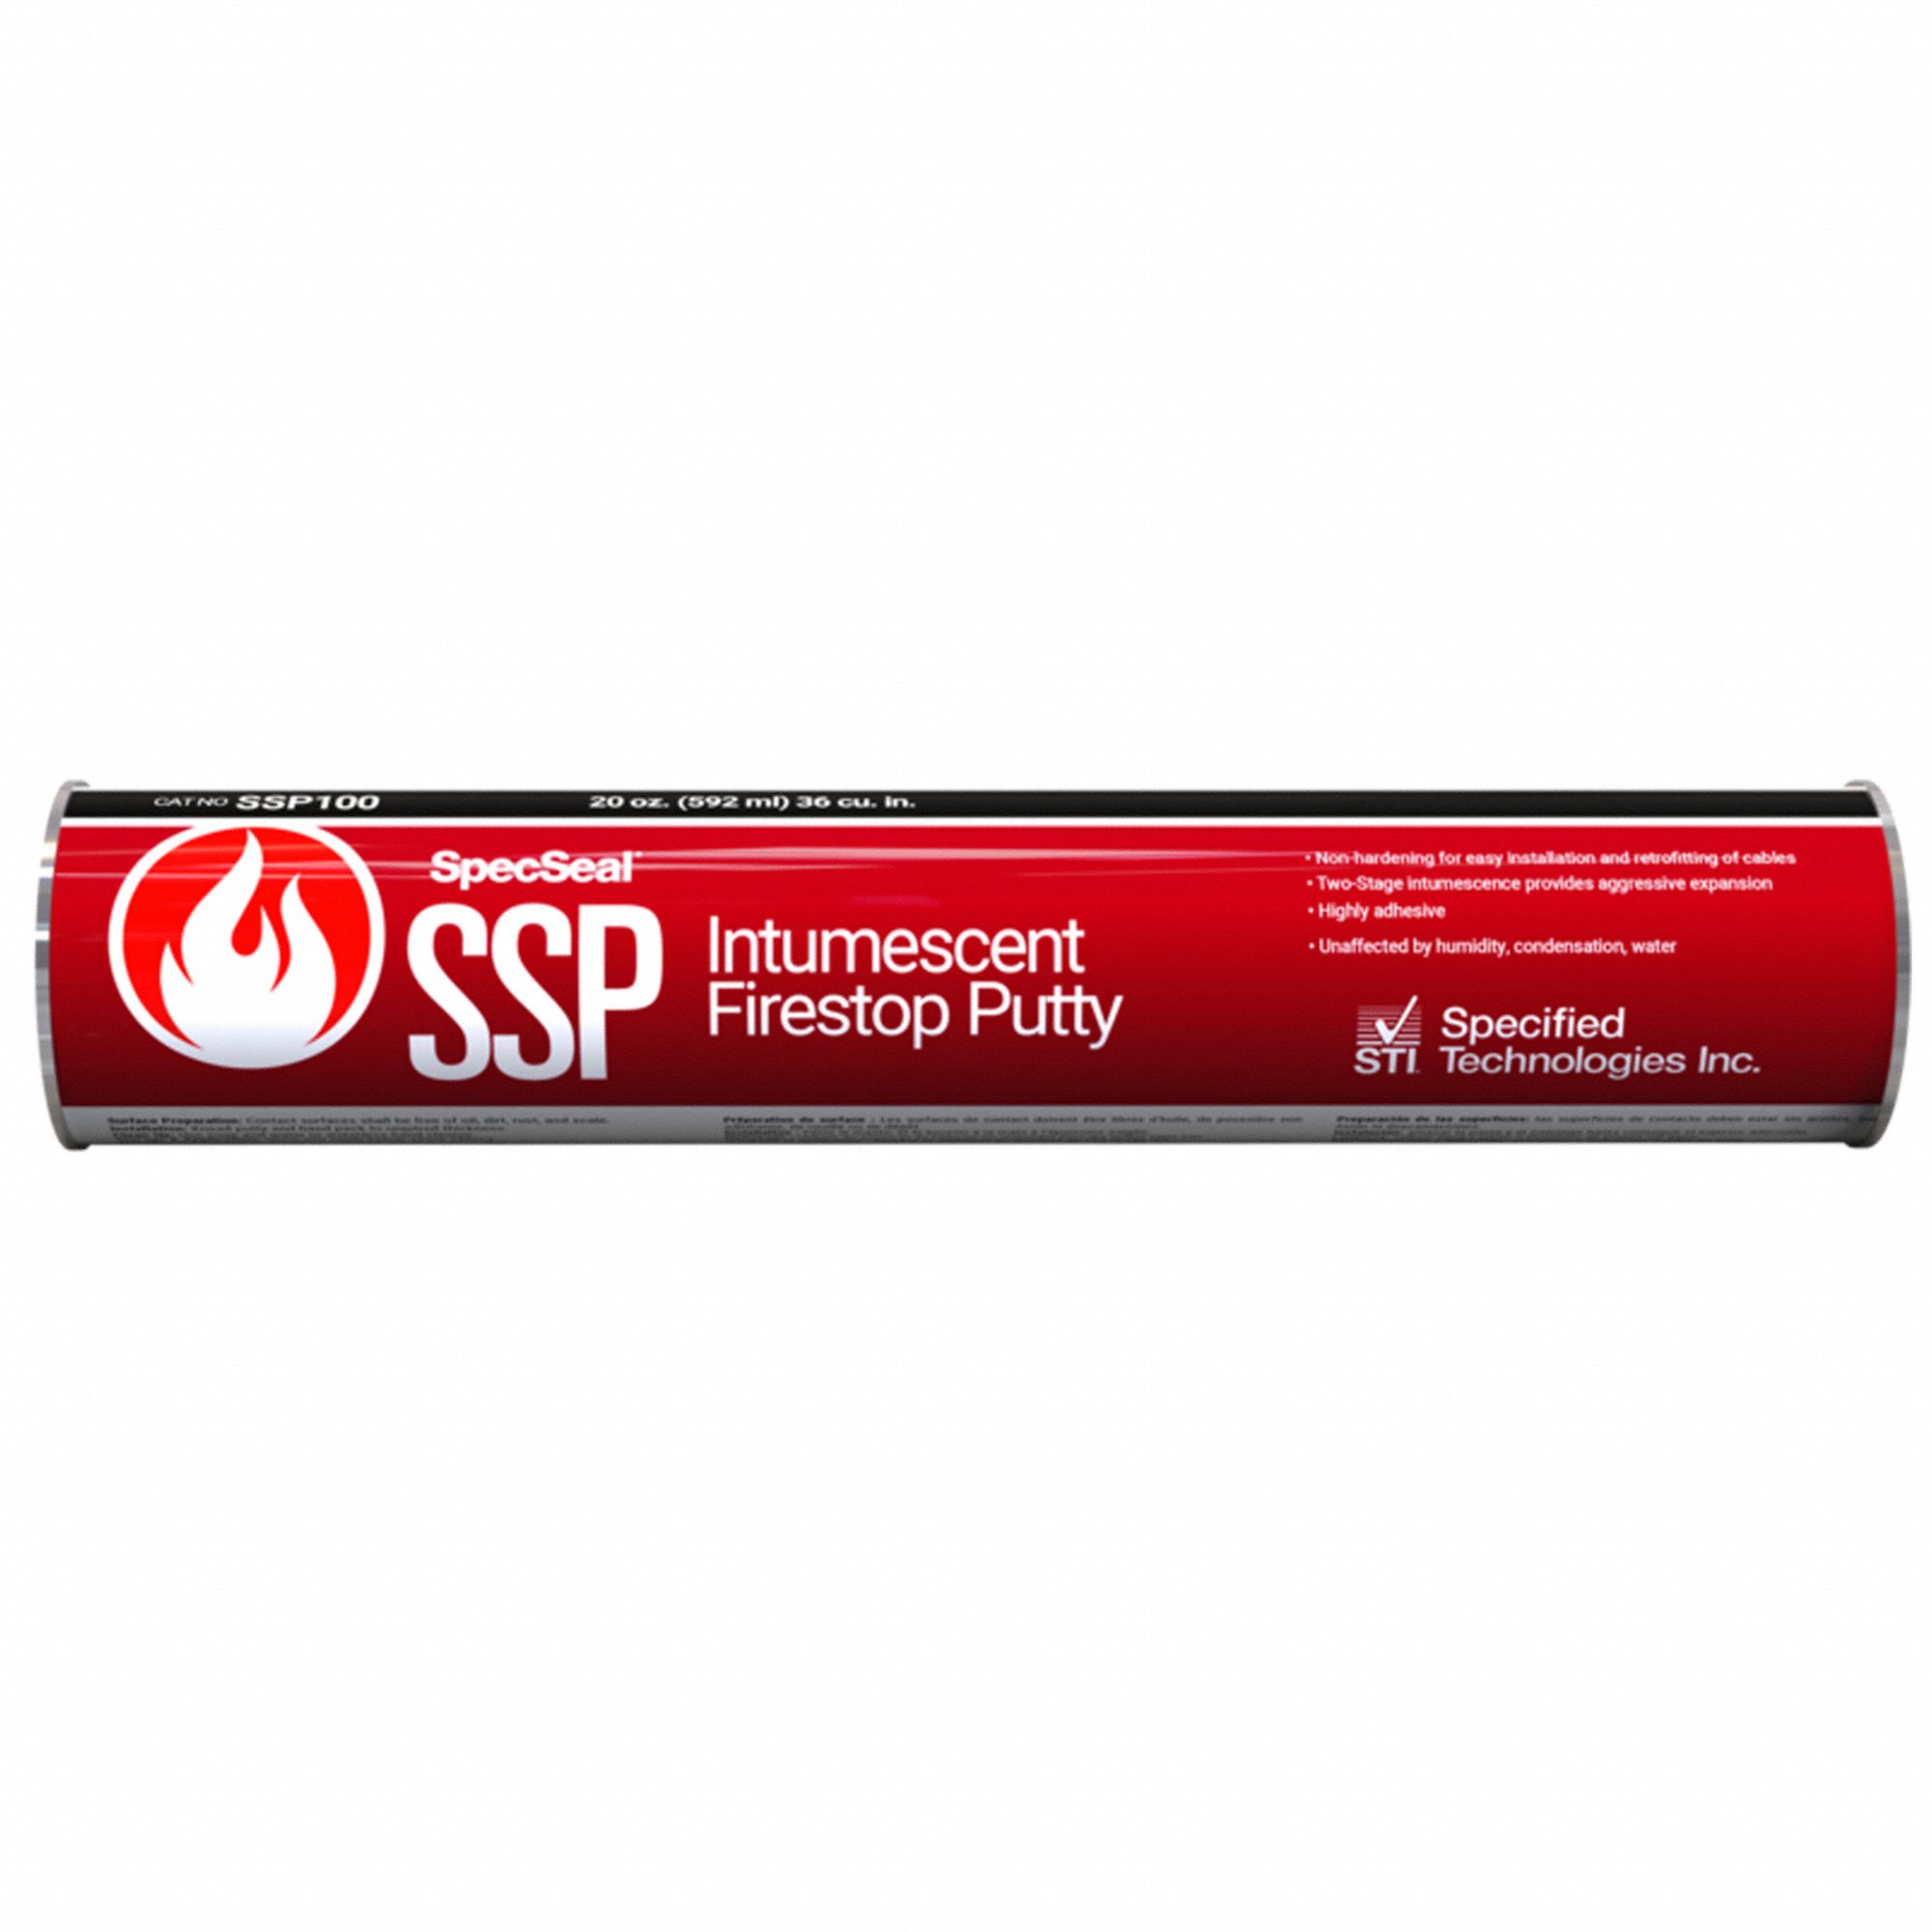 Fire Resistant Putty